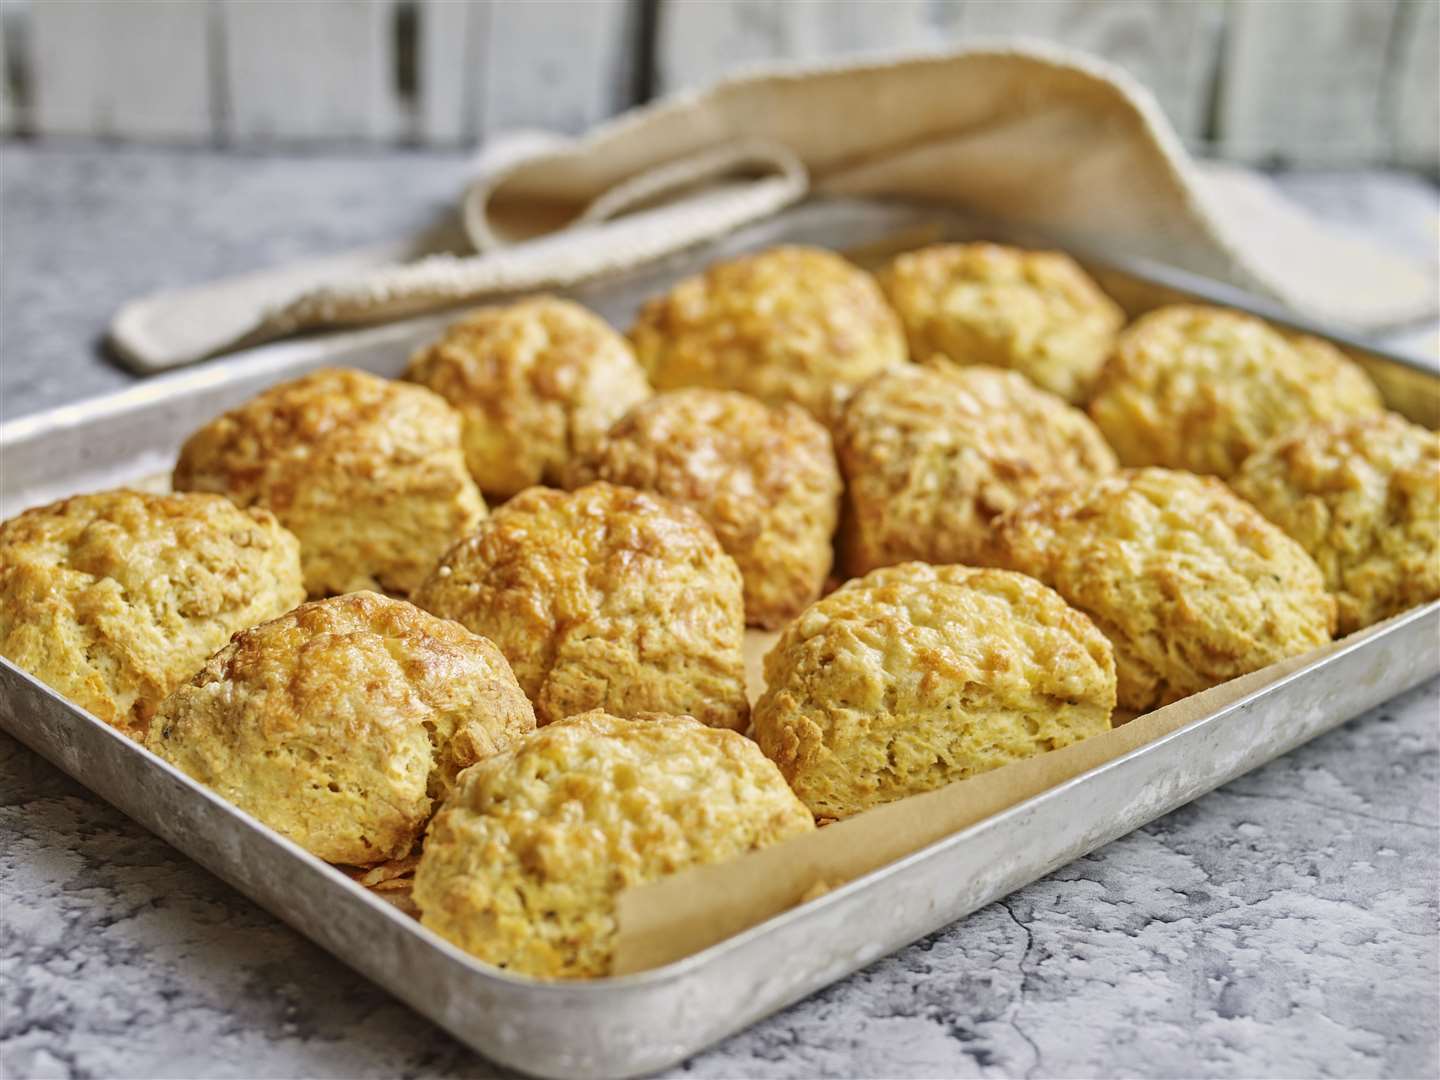 Have you been baking cheese scones during lockdown? Thousands have Picture: National Trust Images/William Shaw